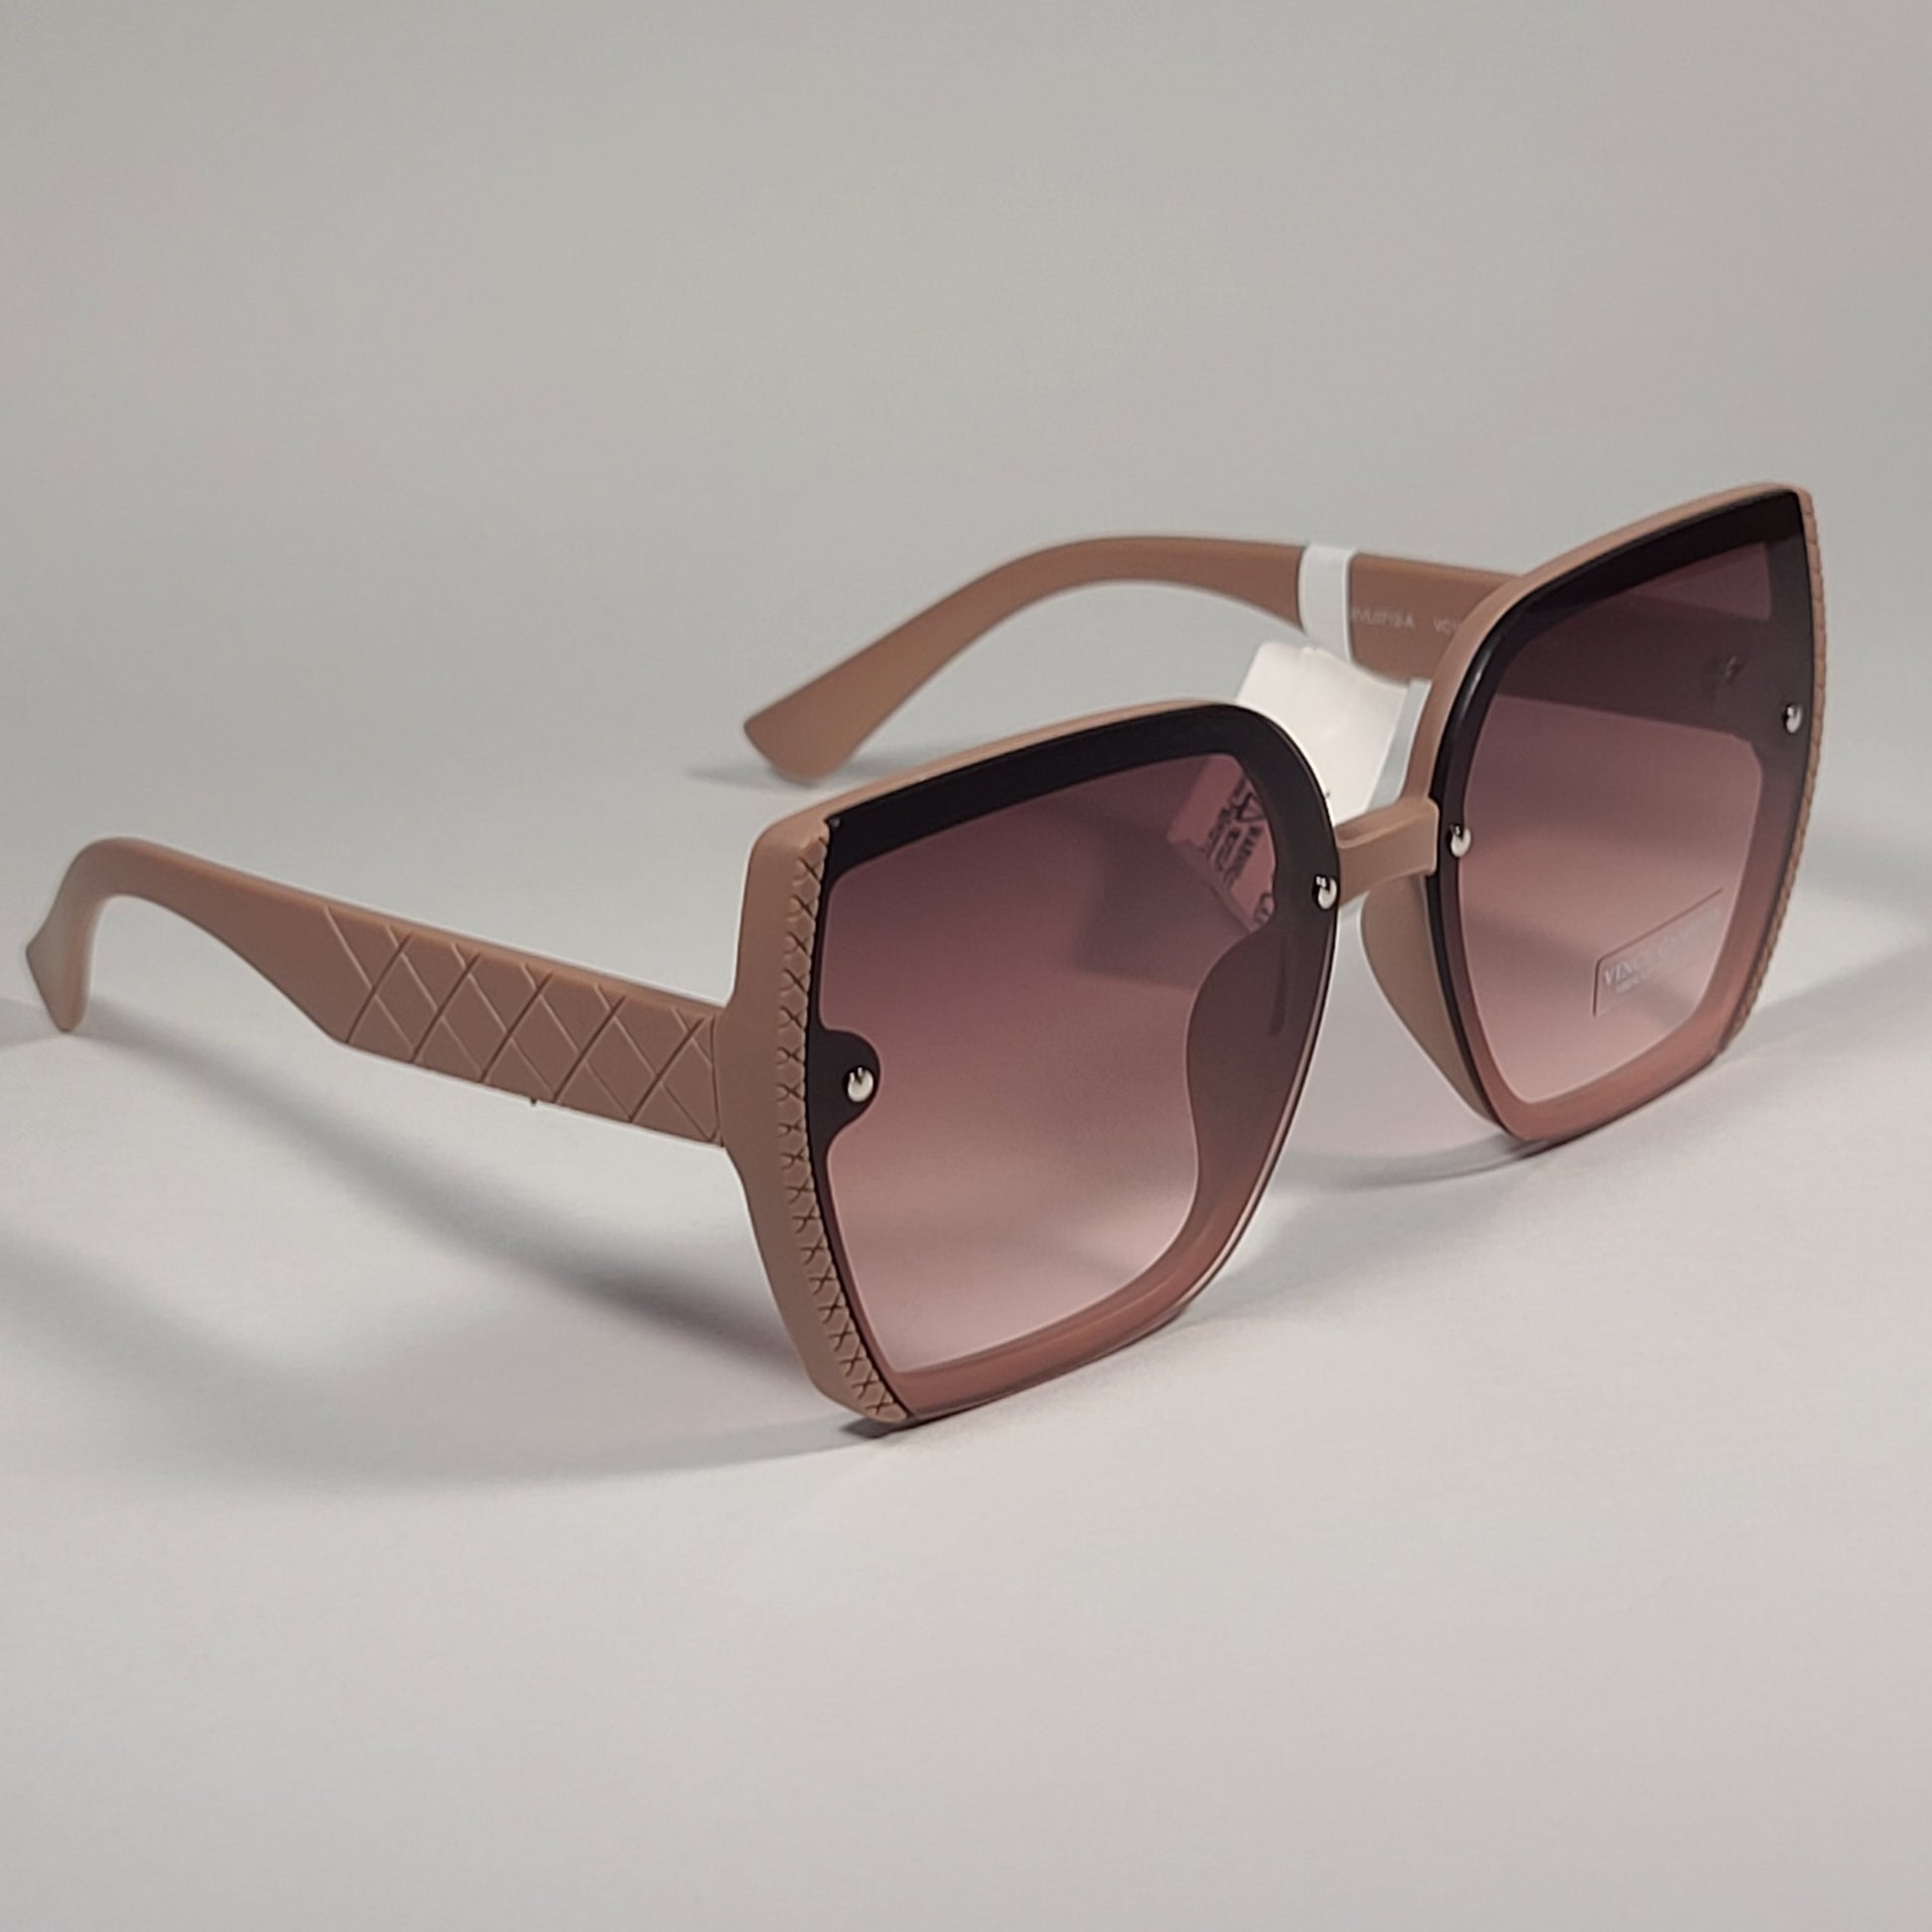 Vince Camuto VC1064 ND Oversize Butterfly Sunglasses Nude Frame Brown Gradient Lens - Sunglasses